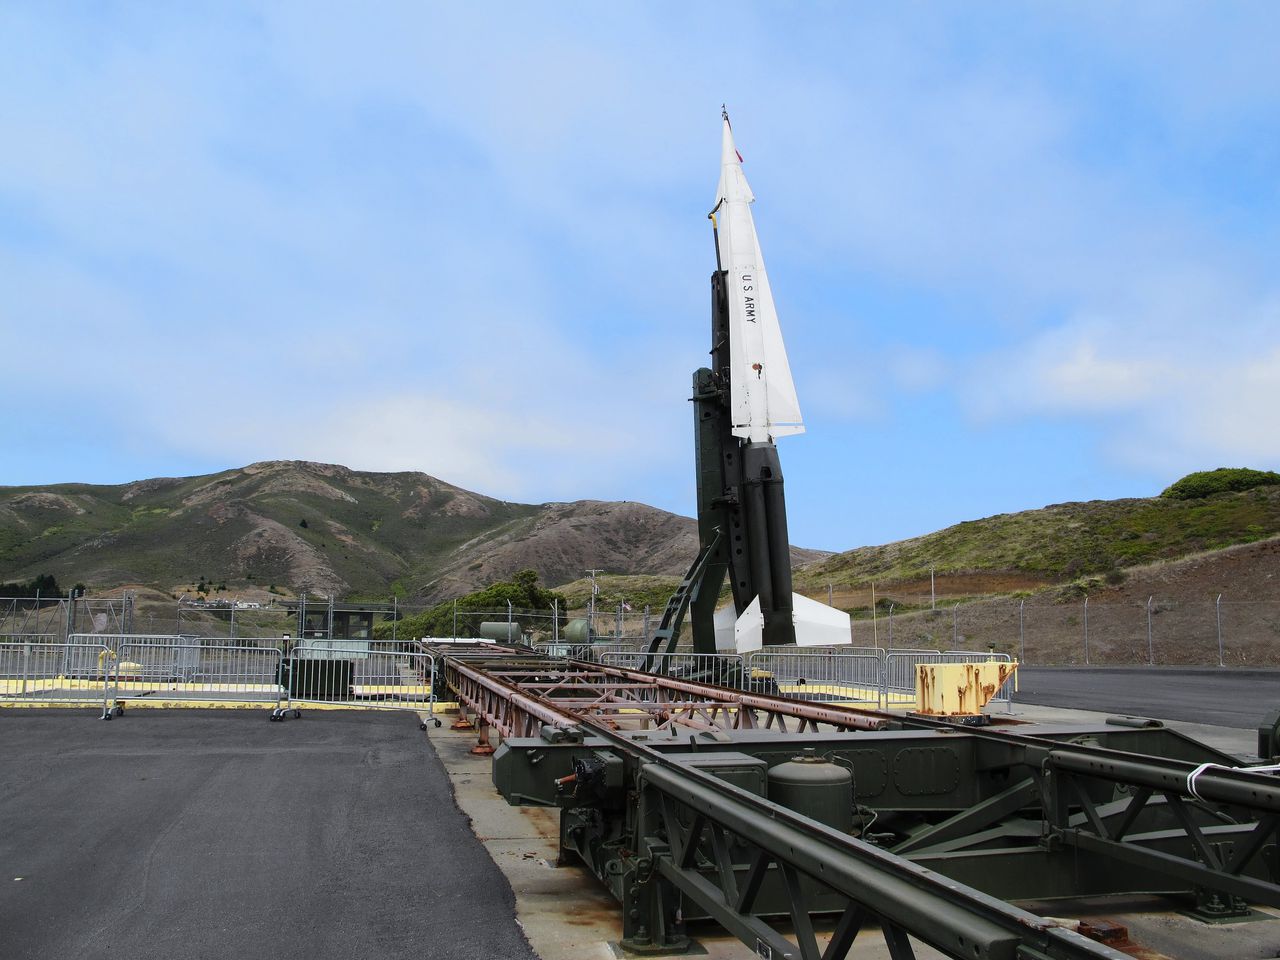 Nike Hercules Nuclear Missile Site SF-88 Missile Launcher